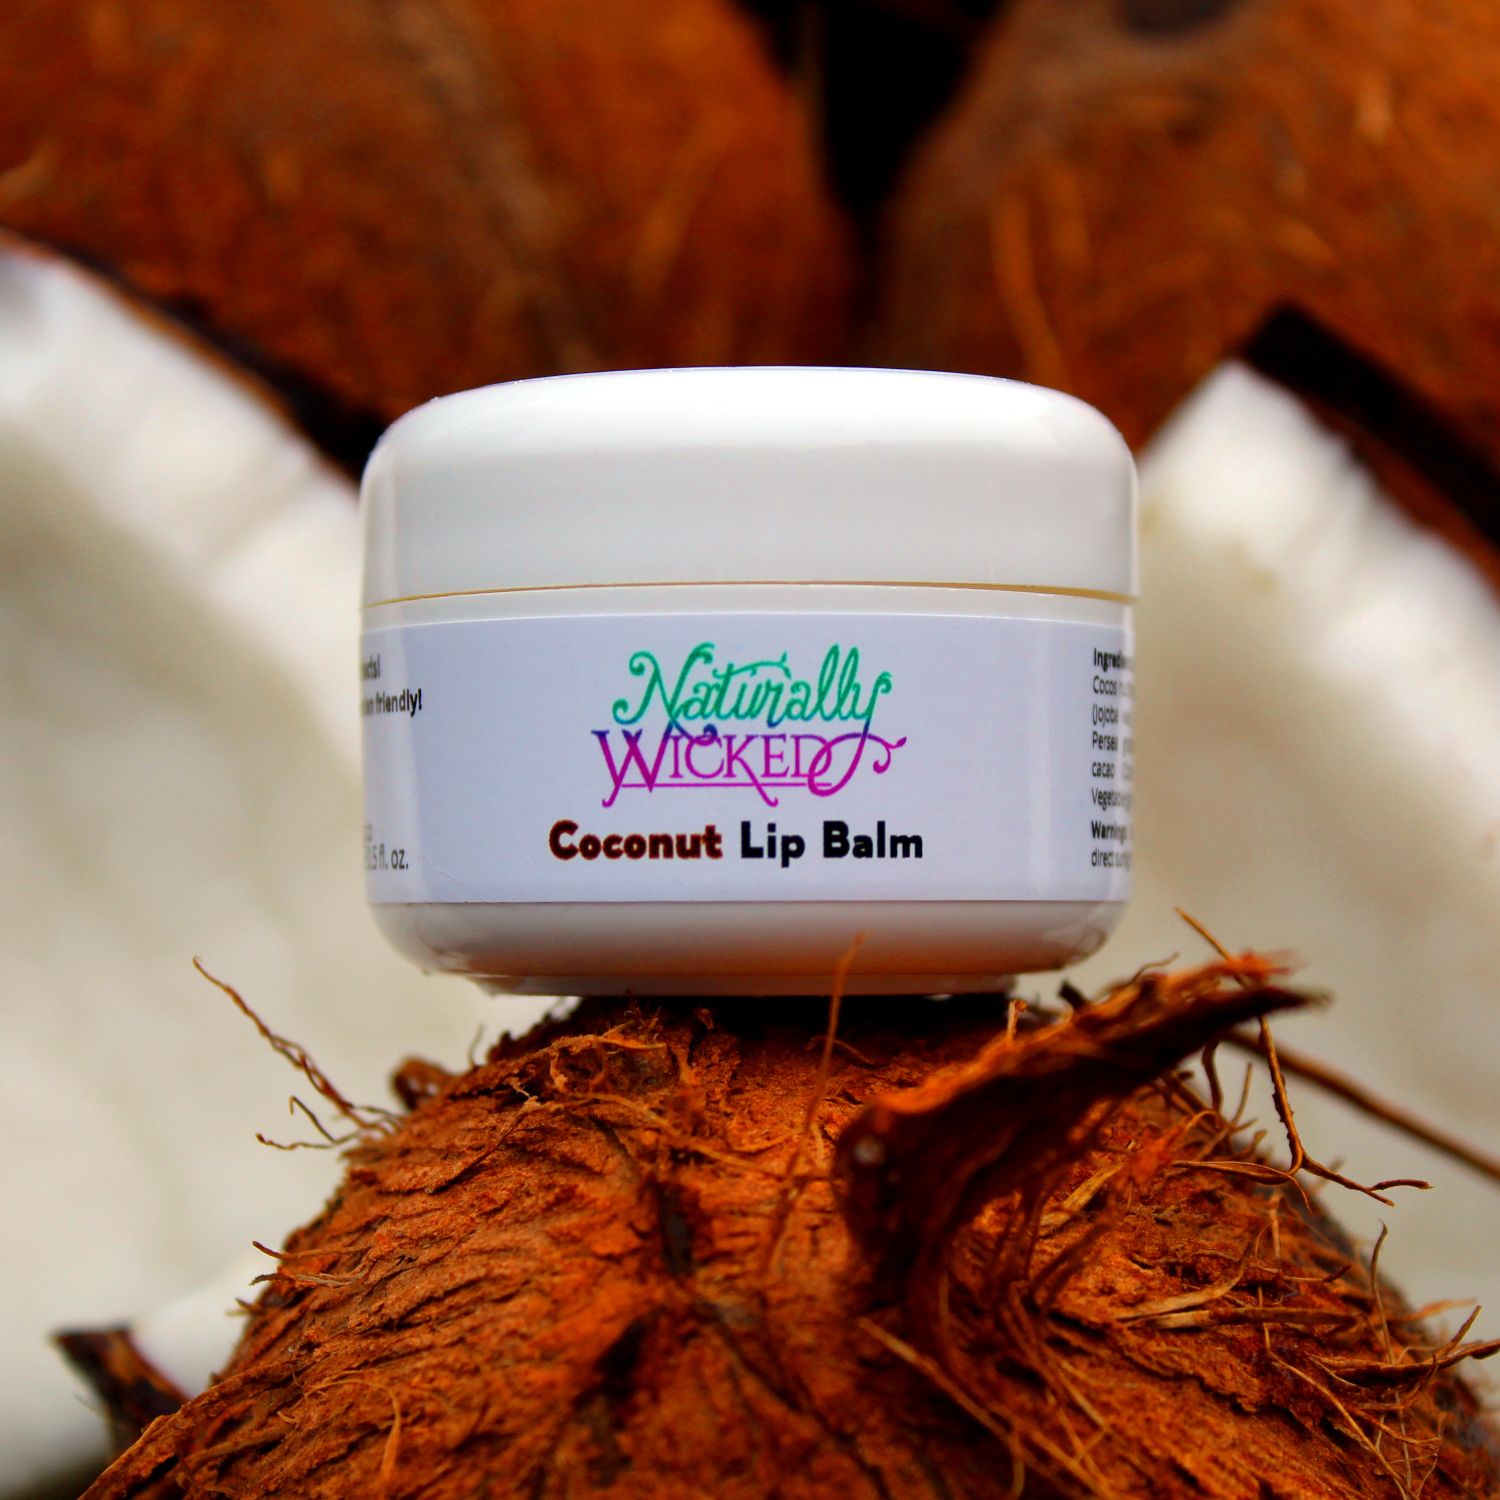 Naturally Wicked Coconut Lip Balm Sat On Top Of Brown Coconut Shell Between Broken White Inner Coconuts